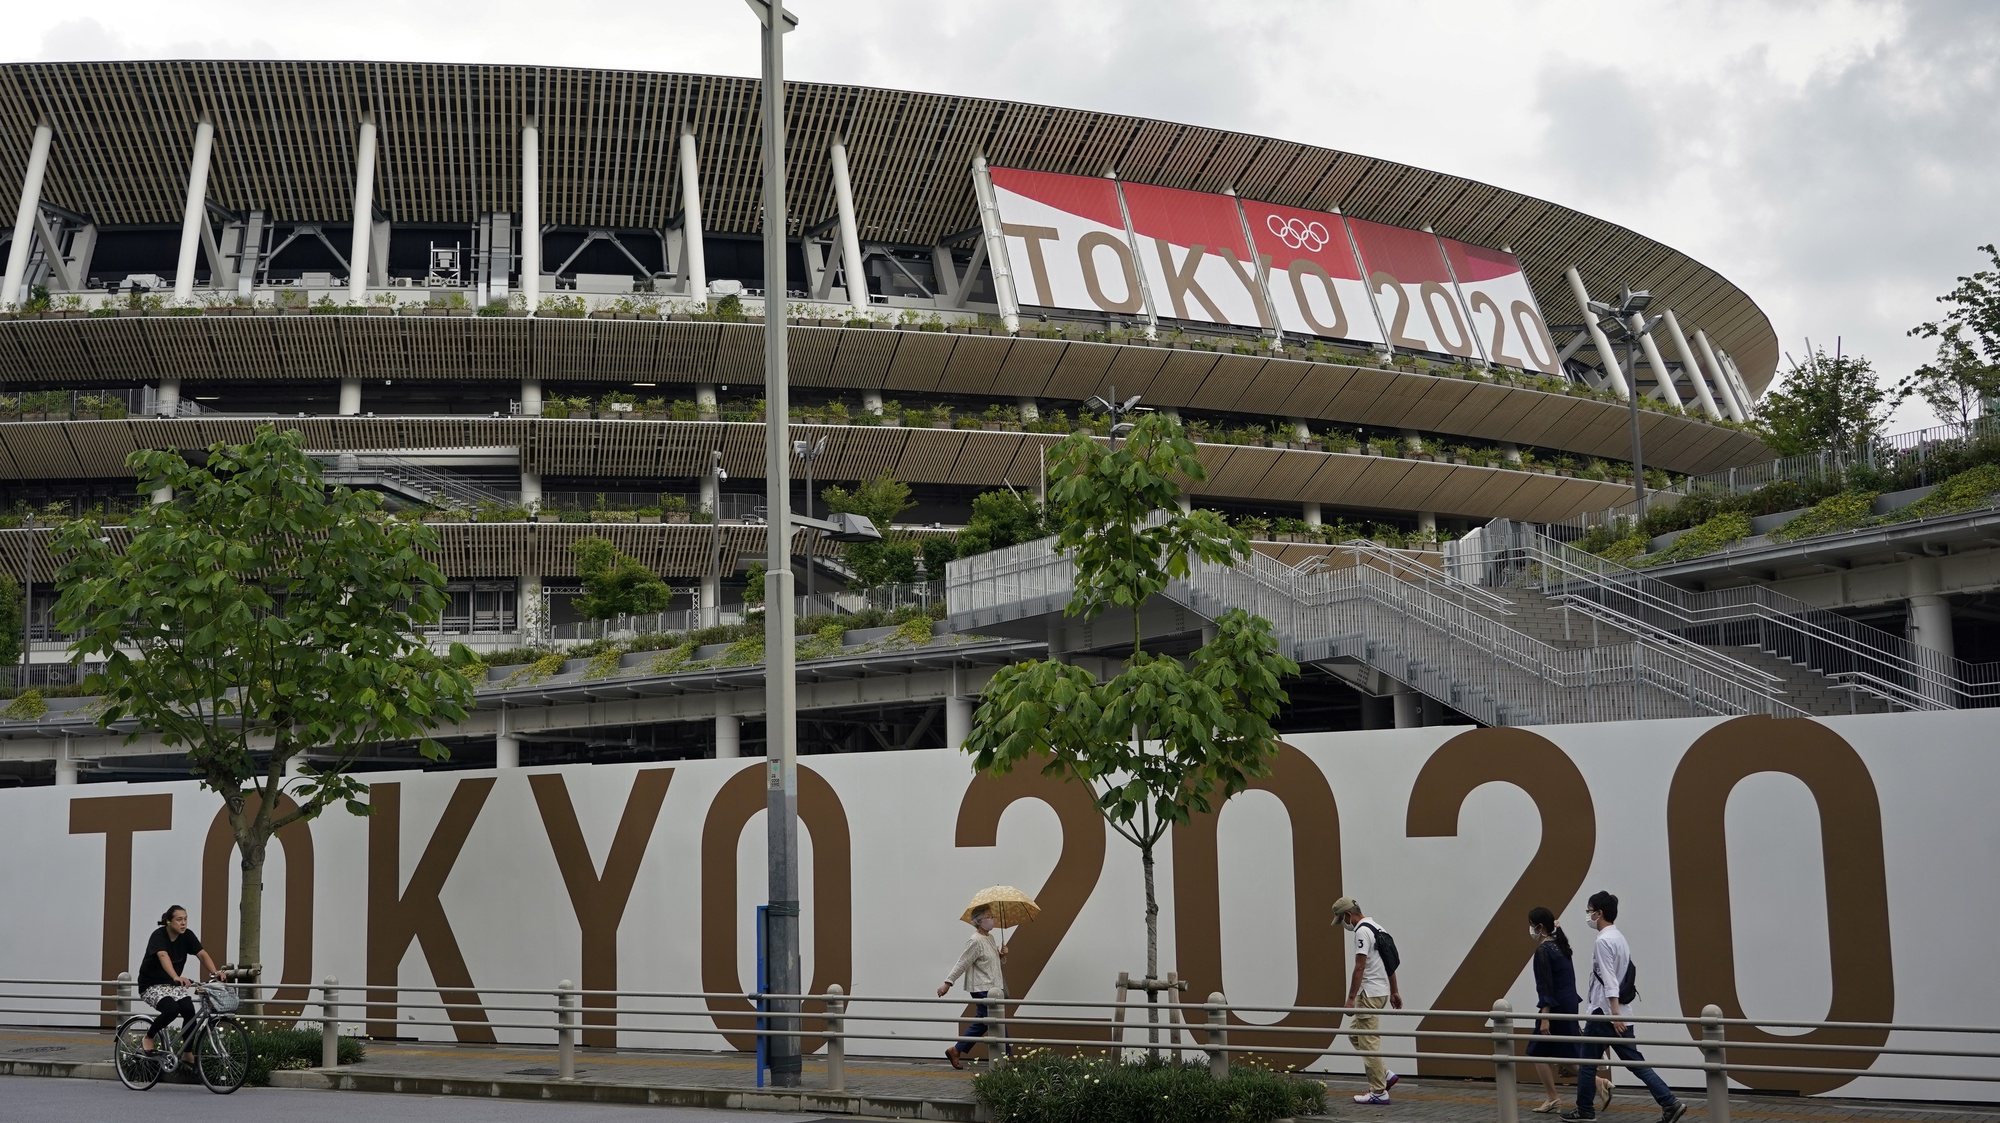 epa09294866 Passersby walk past the National Stadium, the main stadium of the 2020 Tokyo Olympic Games, in Tokyo, Japan, 23 June 2021, one month before the opening of the Tokyo 2020 Olympic Games. The National Stadium will host the opening, closing ceremonies and the athletics events. The Summer Games were postponed due to COVID-19 Coronavirus pandemic.  EPA/FRANCK ROBICHON